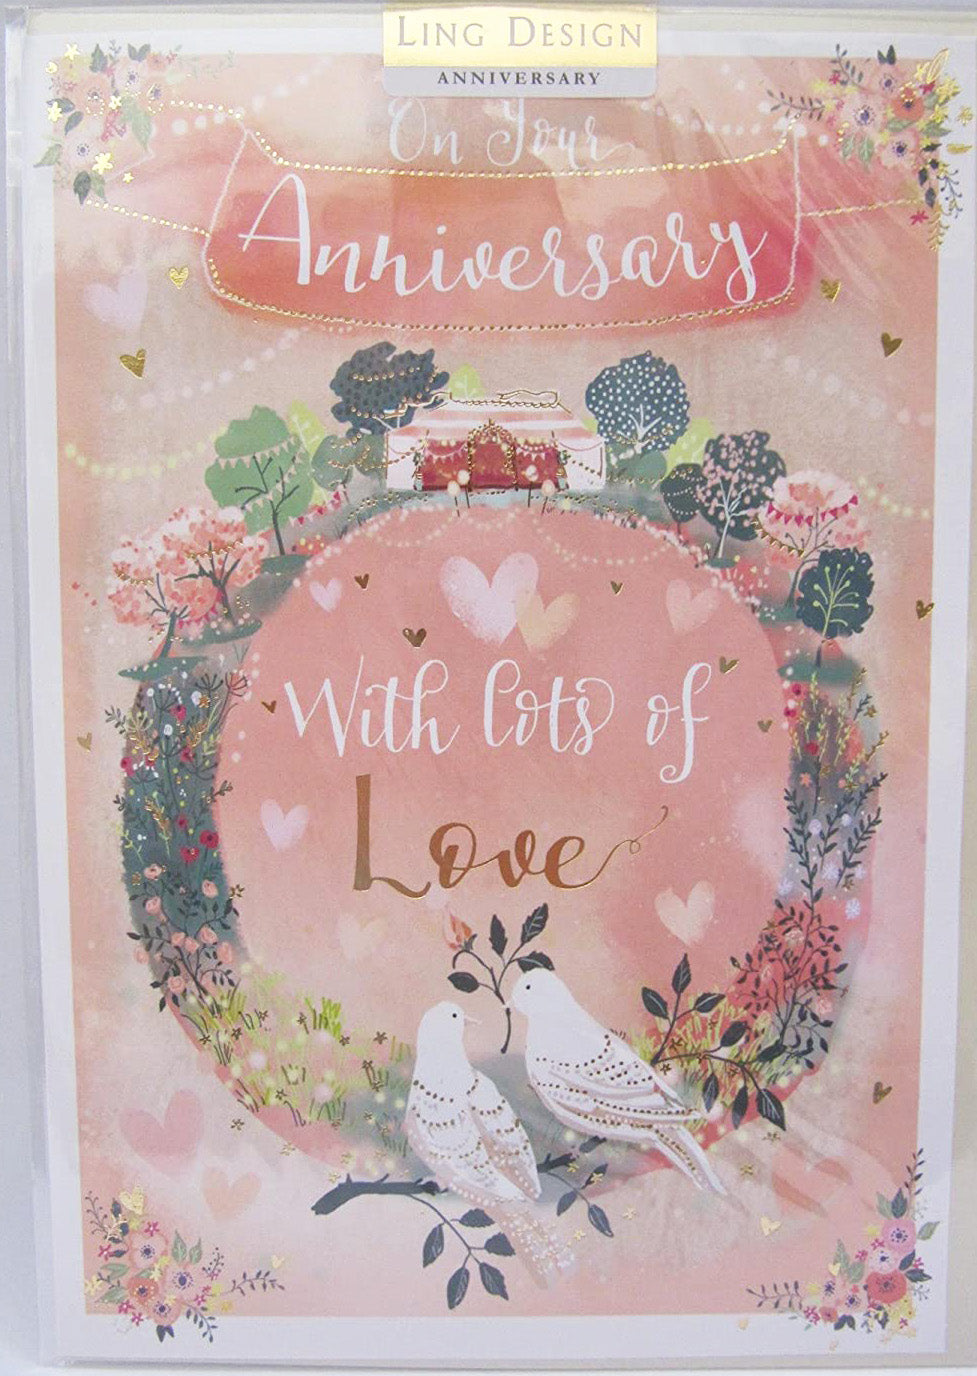 General Anniversary Card - The White Doves Of Love